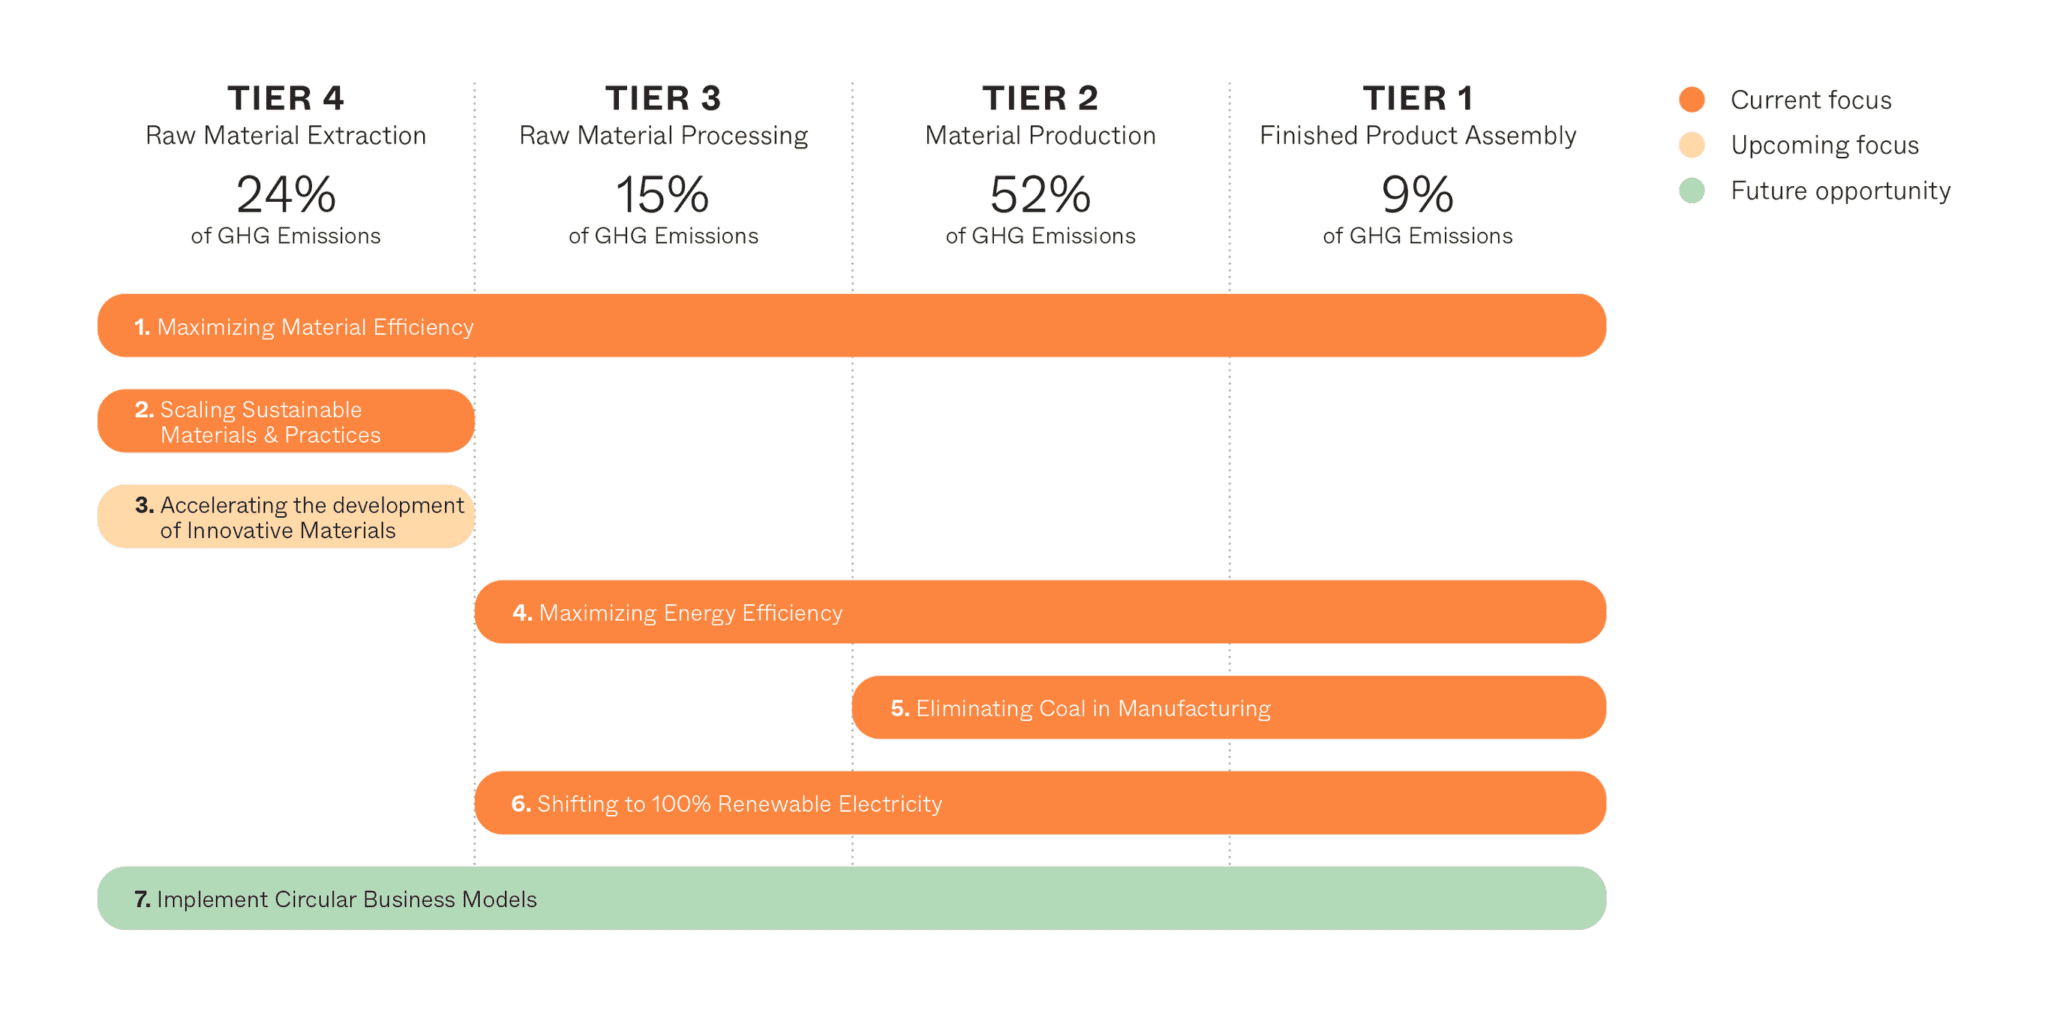 Tiers graph of AII's current focus.